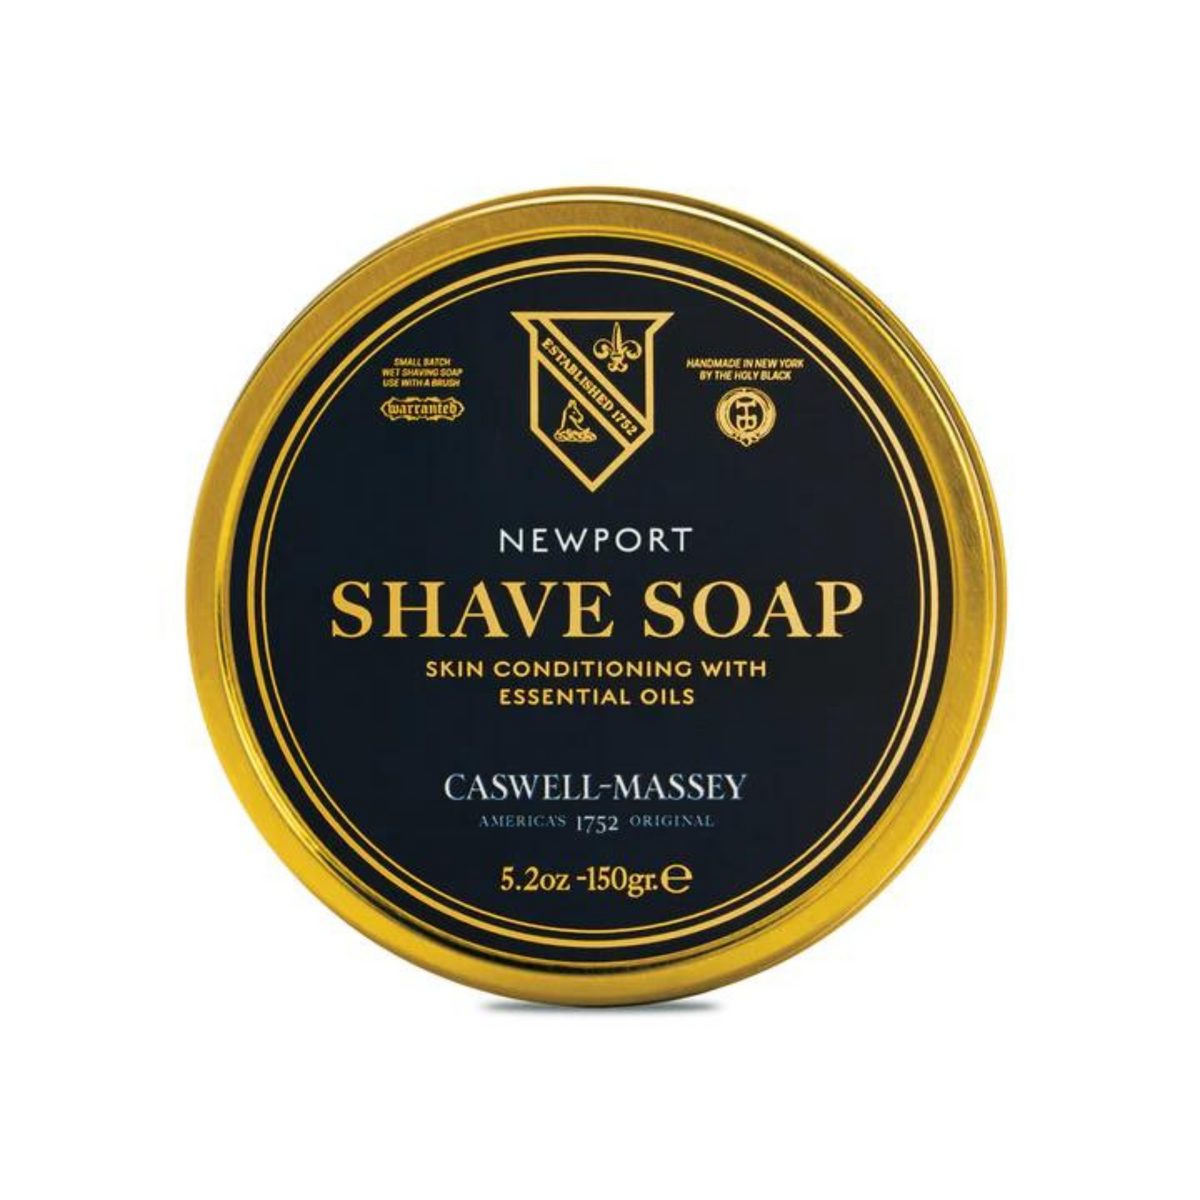 Primary Image of Newport Shave Soap (5.2 oz) 